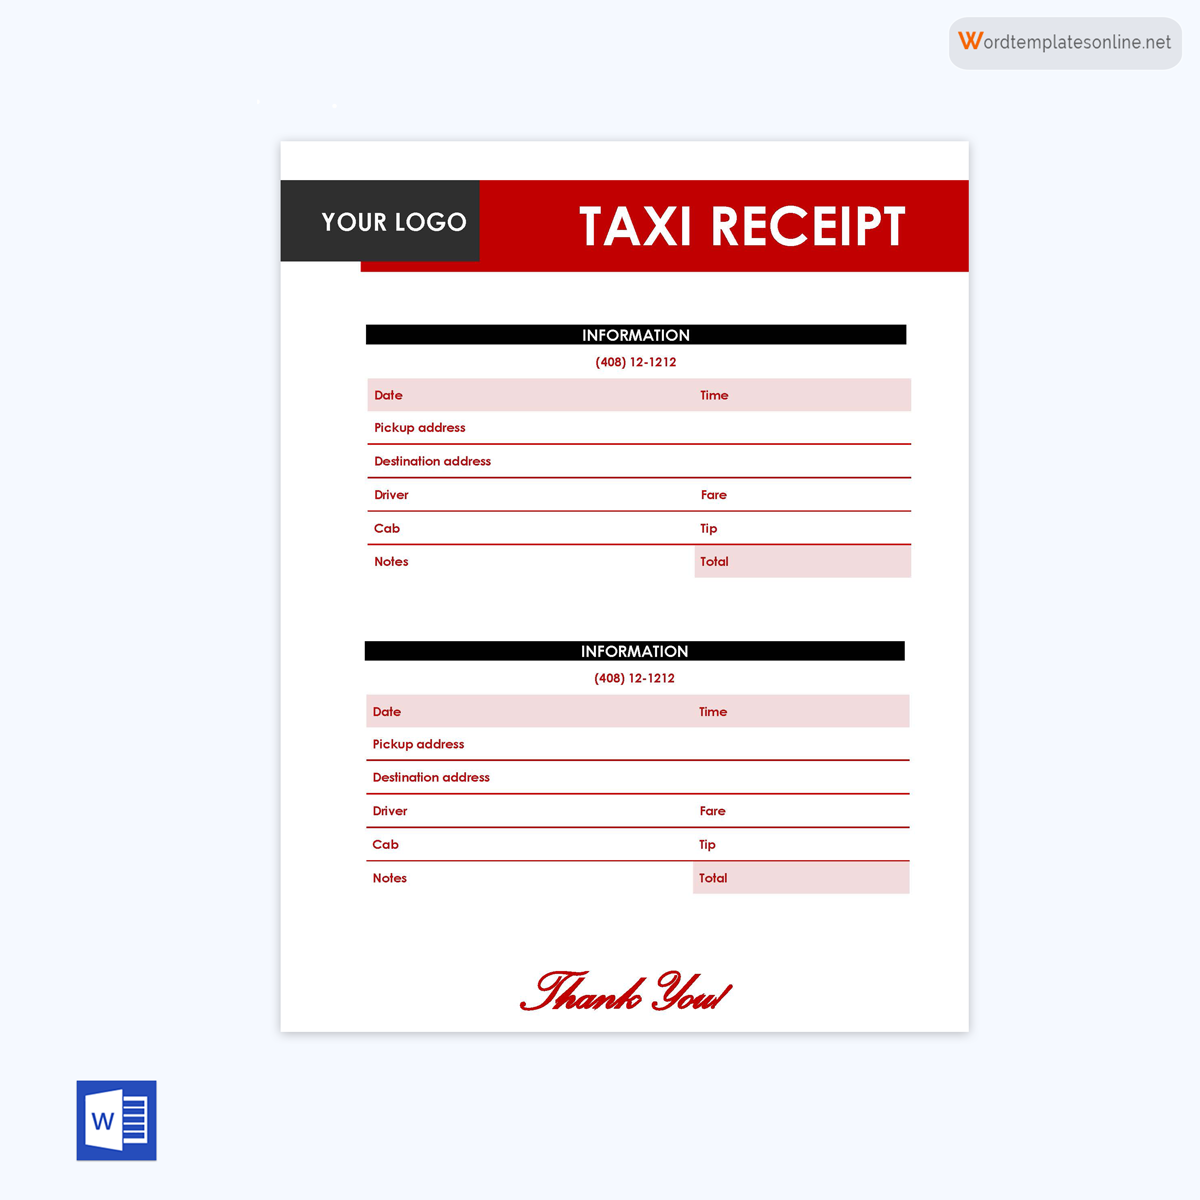 Taxi receipt templates in PDF format